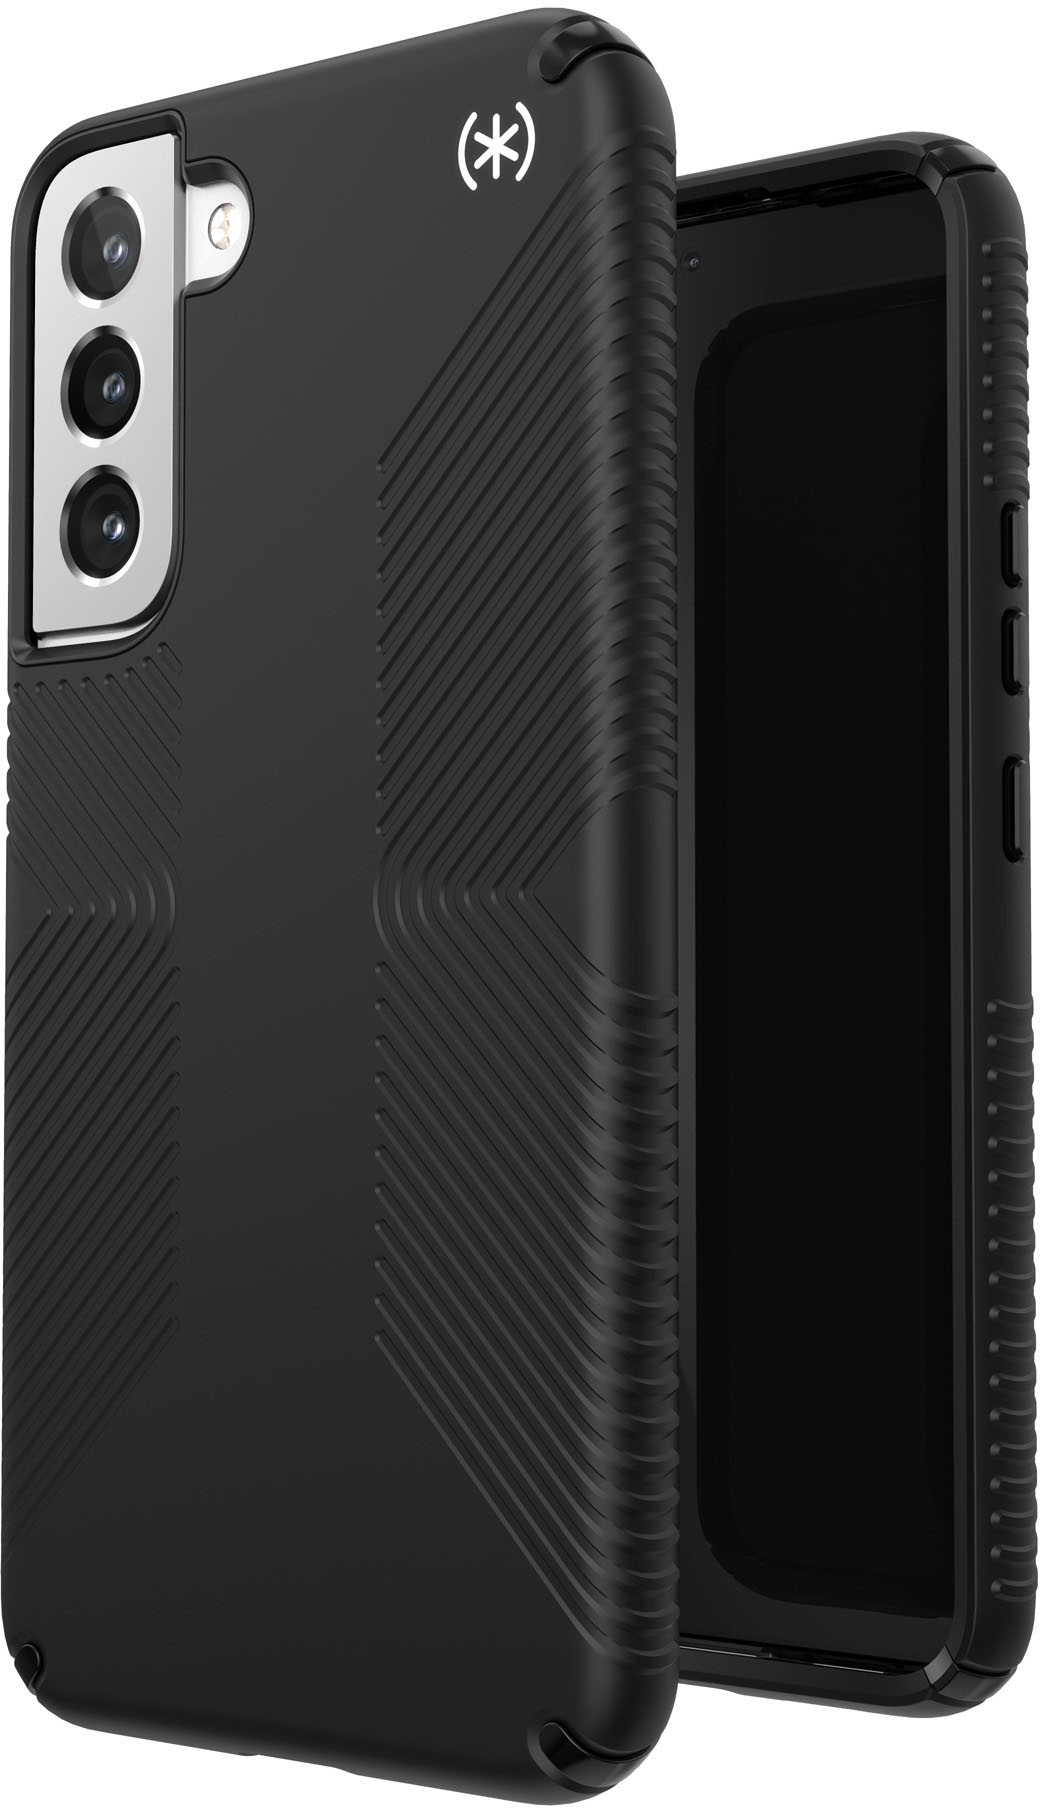 Angle View: Speck - CandyShell Grip Case for LG G5 - Black/white